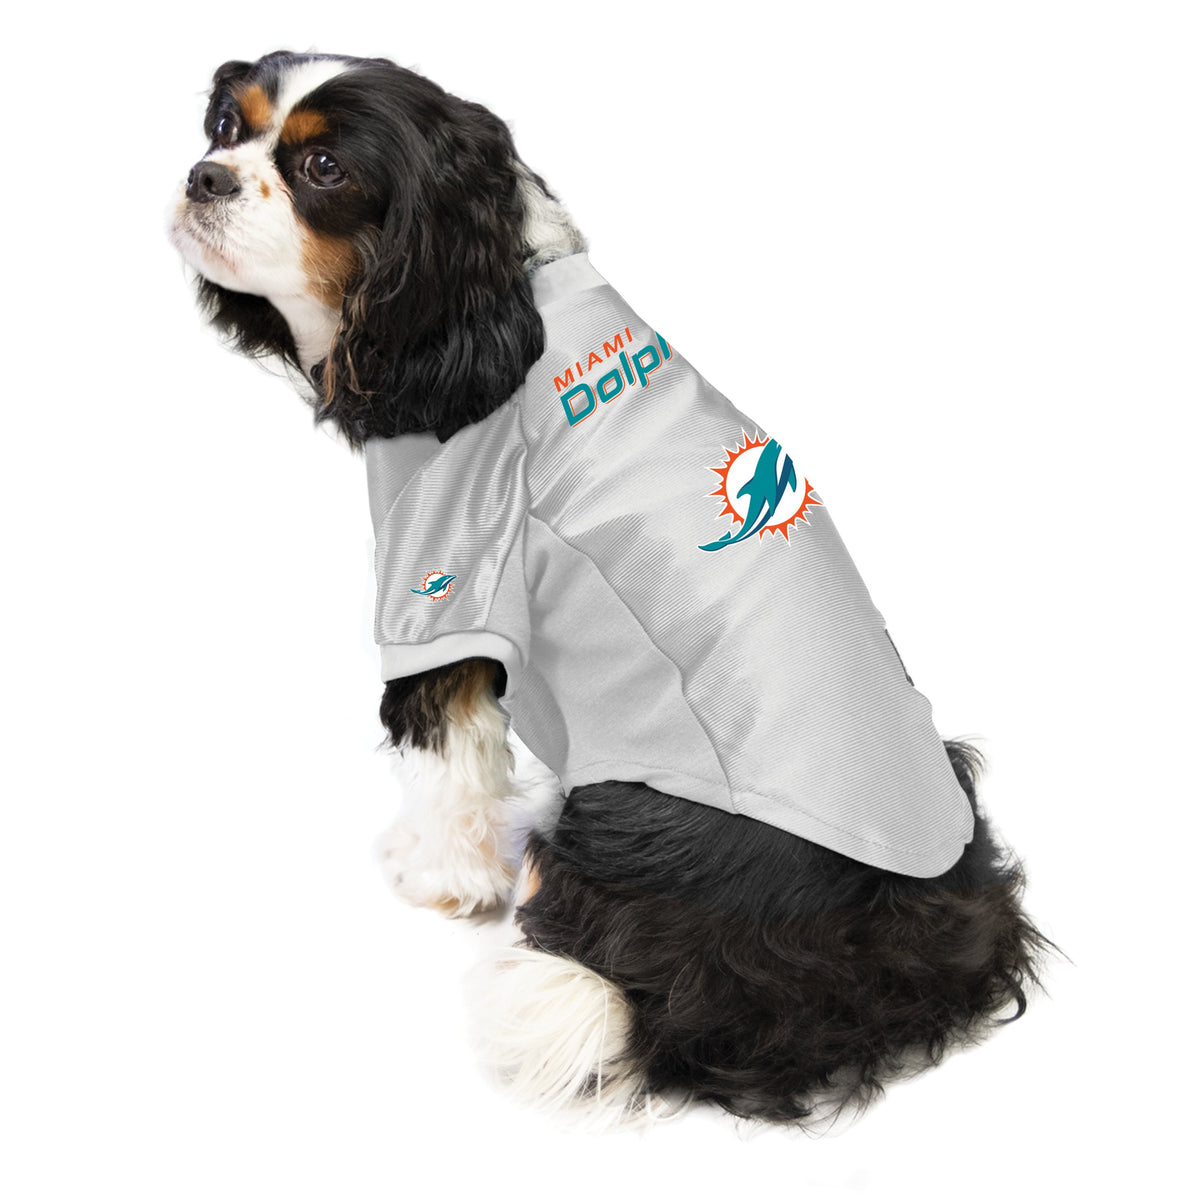 Miami Dolphins Stretch Jersey - 3 Red Rovers